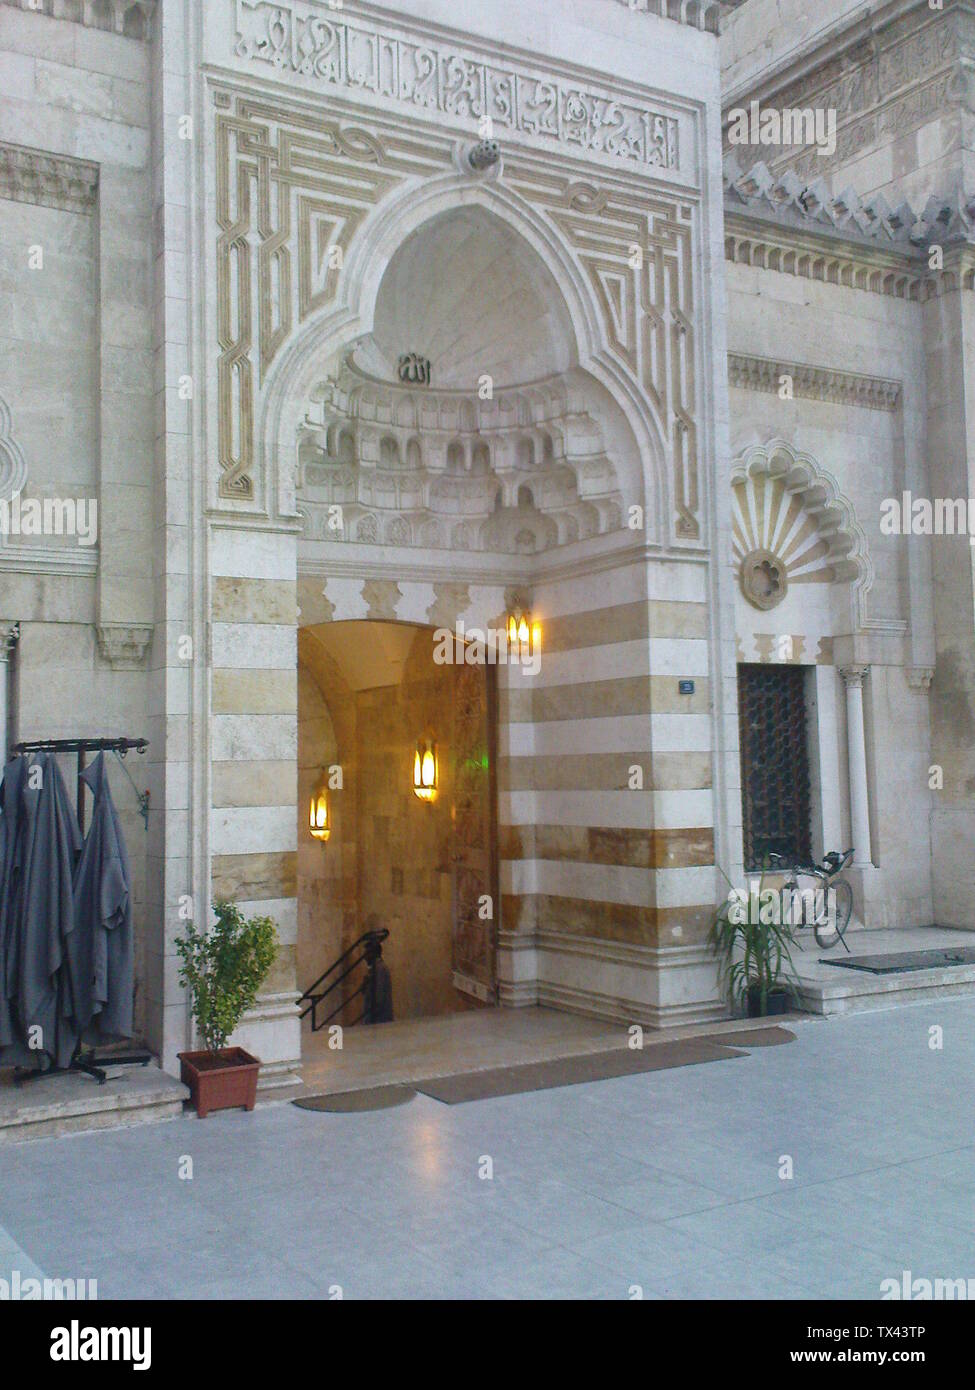 Gate of the Omayad Mosque of Aleppo Syria.; 30 April 2009Â (according to Exif data); Transferred from ar.pedia to Commons. (See file); Ø£Ø¨Ùˆ Ø°Ø±; Stock Photo